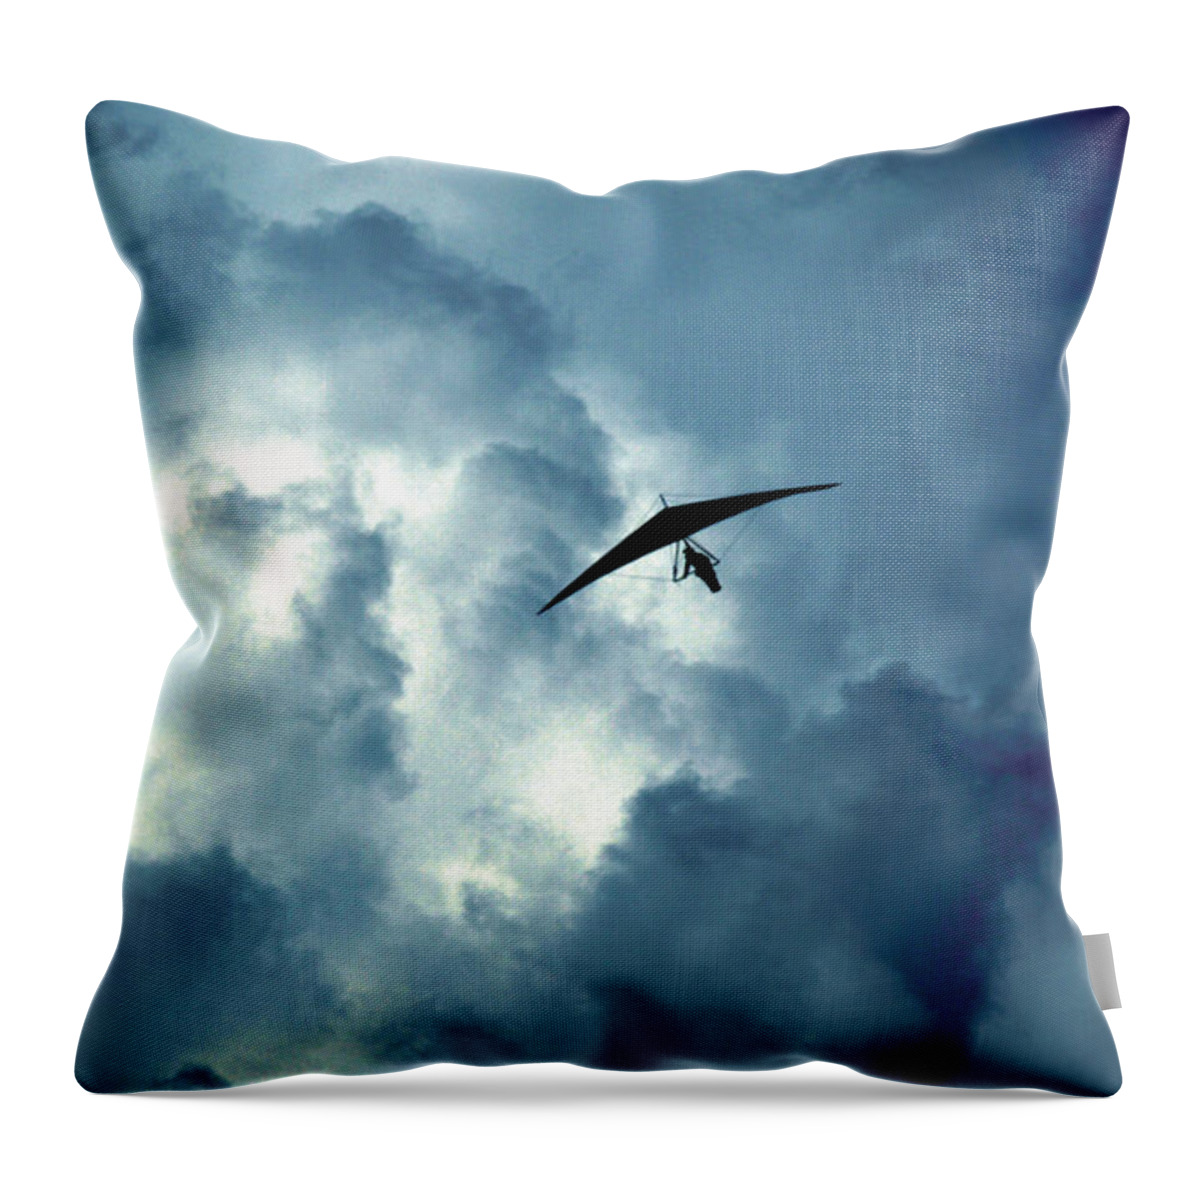 Hang Gliding Throw Pillow featuring the photograph Icarus by Paul Gaj